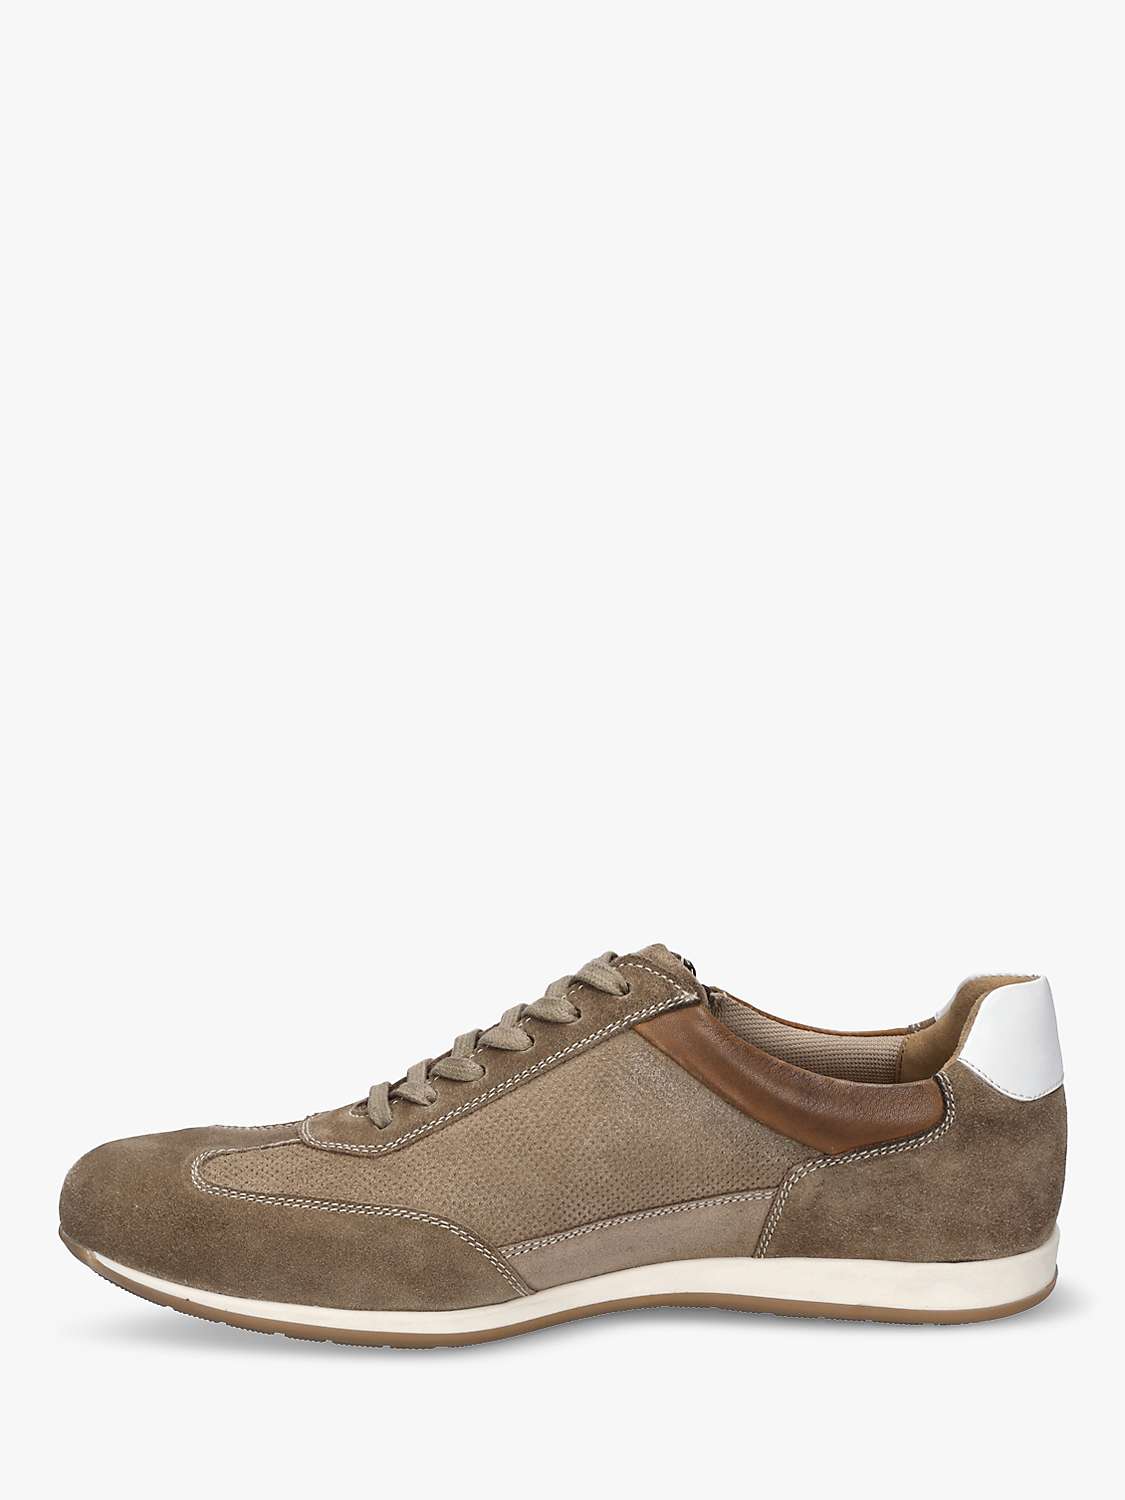 Buy Josef Seibel Colby 03 Trainers Online at johnlewis.com